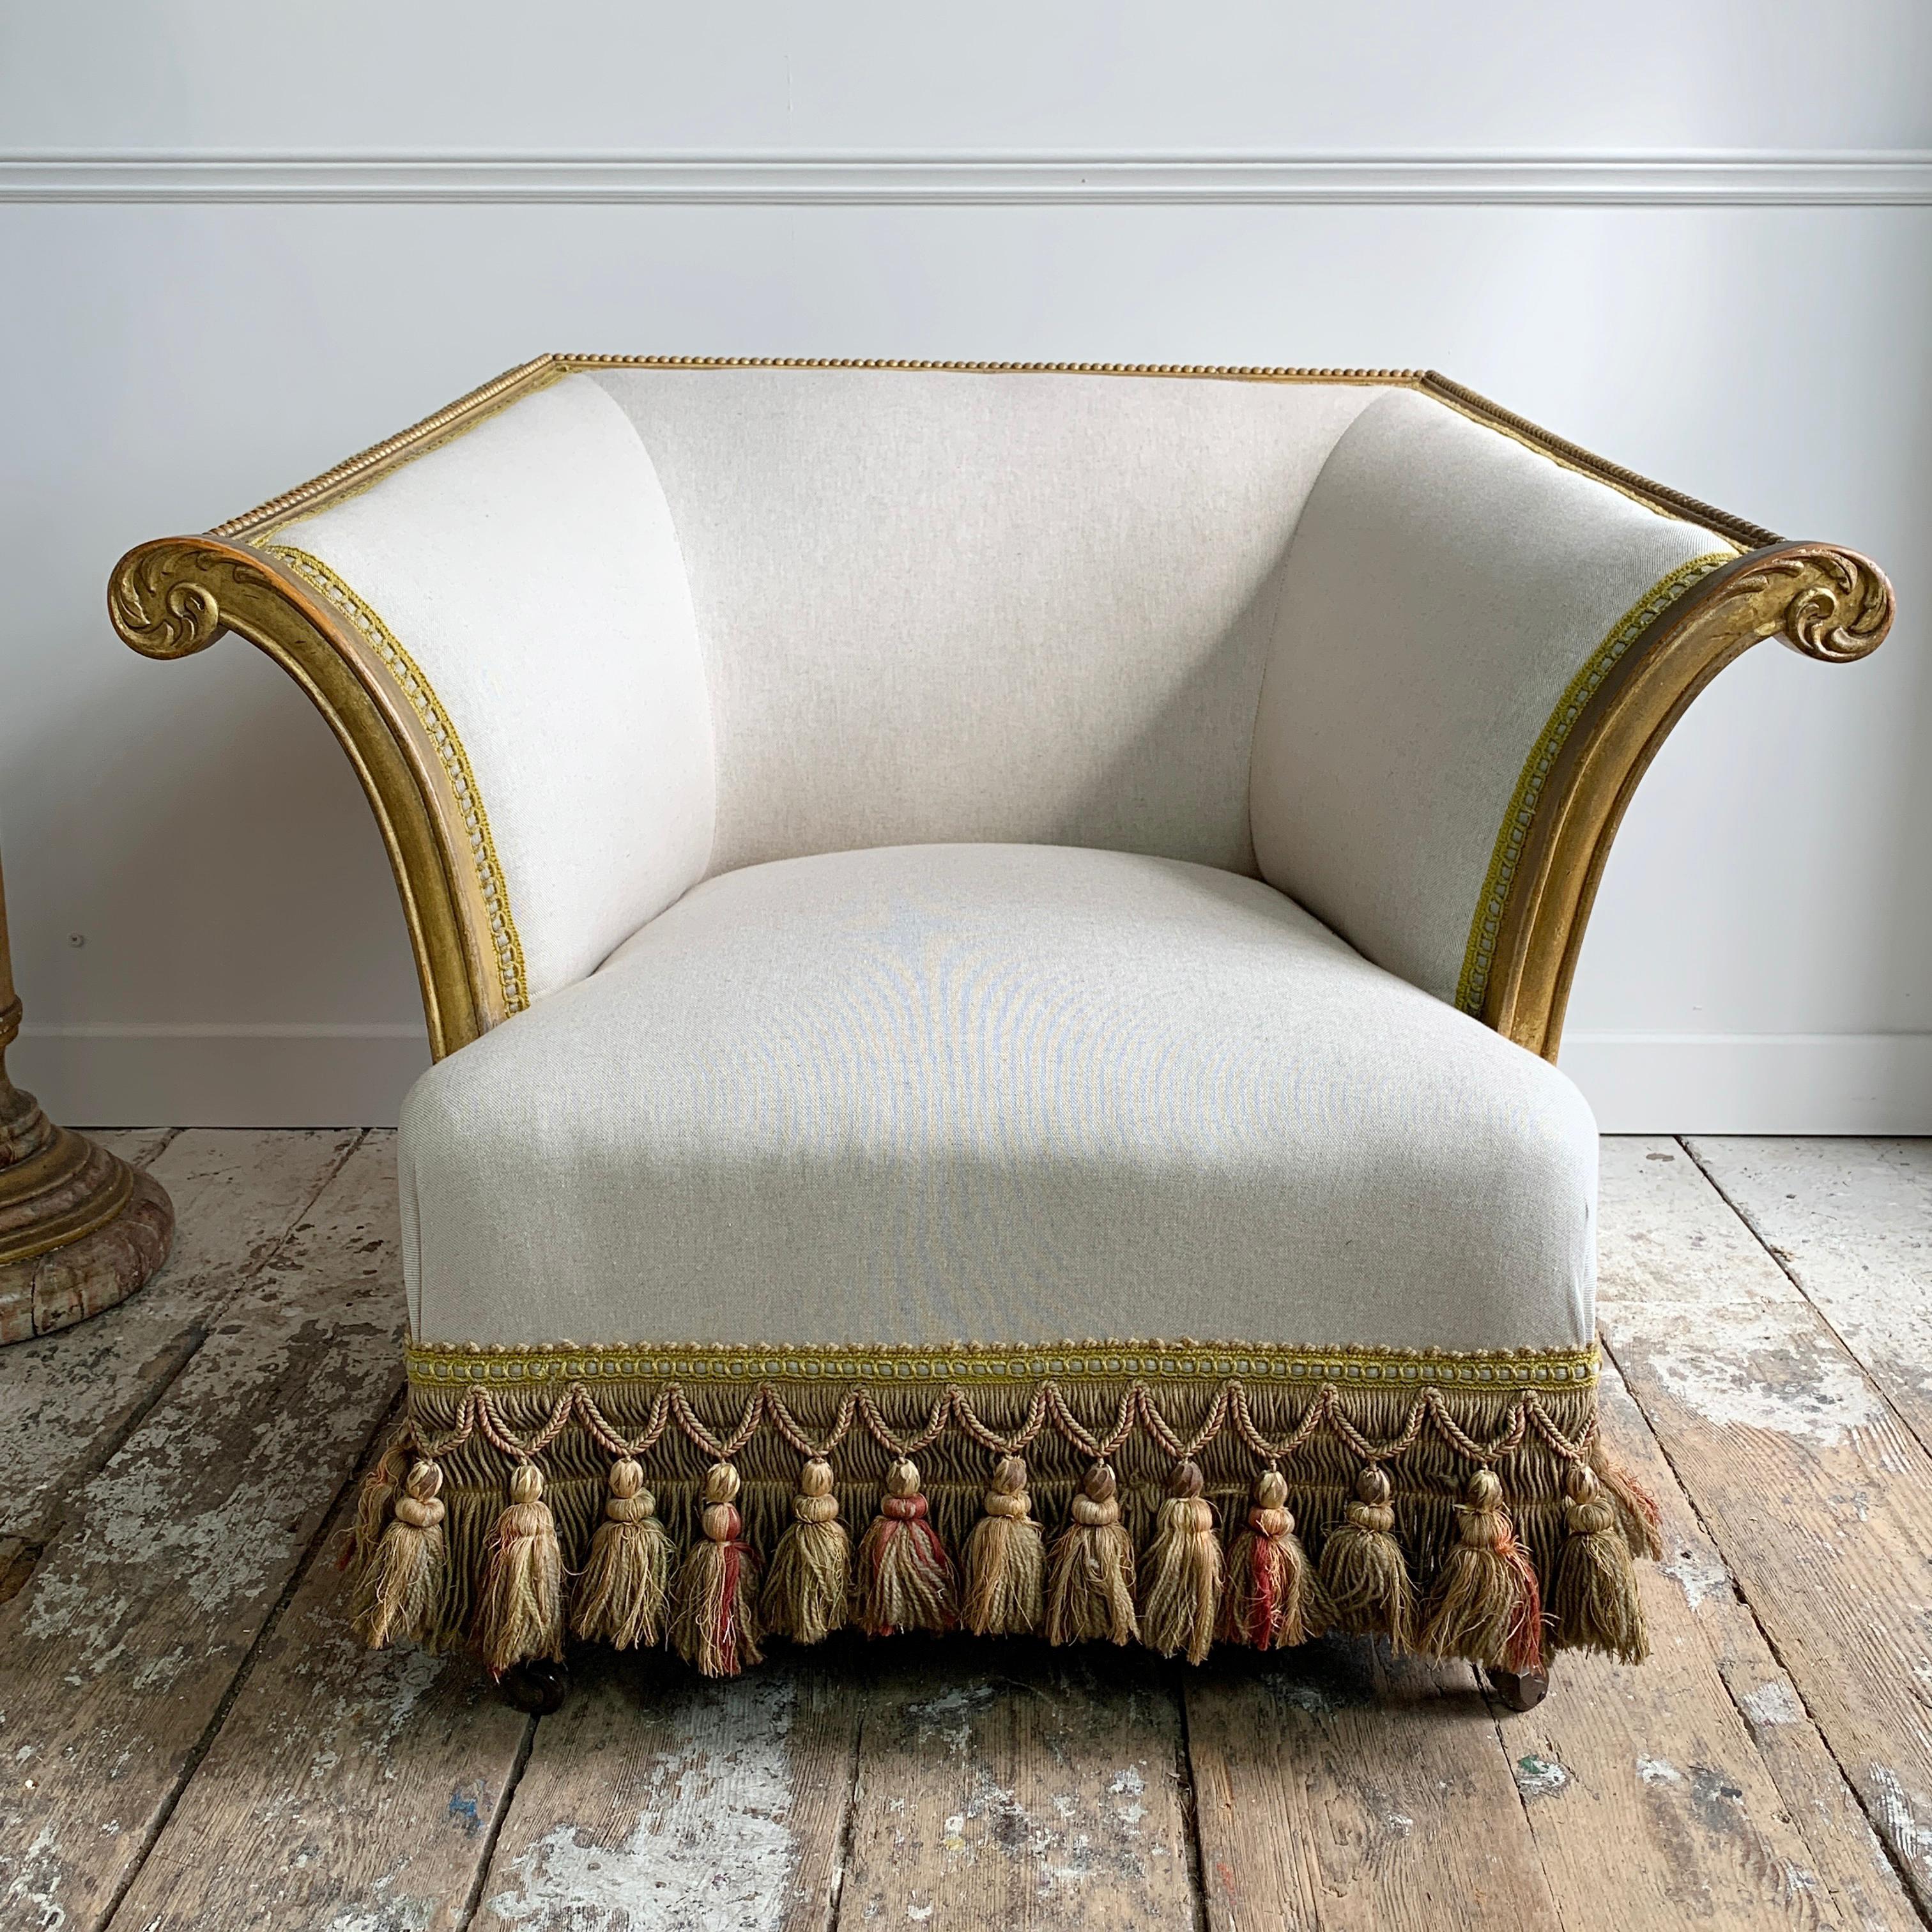 Late Victorian country house armchair, of incredible design in a swooping style that we have not encountered before
solid carved and gilt frame, recently re-upholstered to the highest standard in linen, and retaining it’s original heavy antique